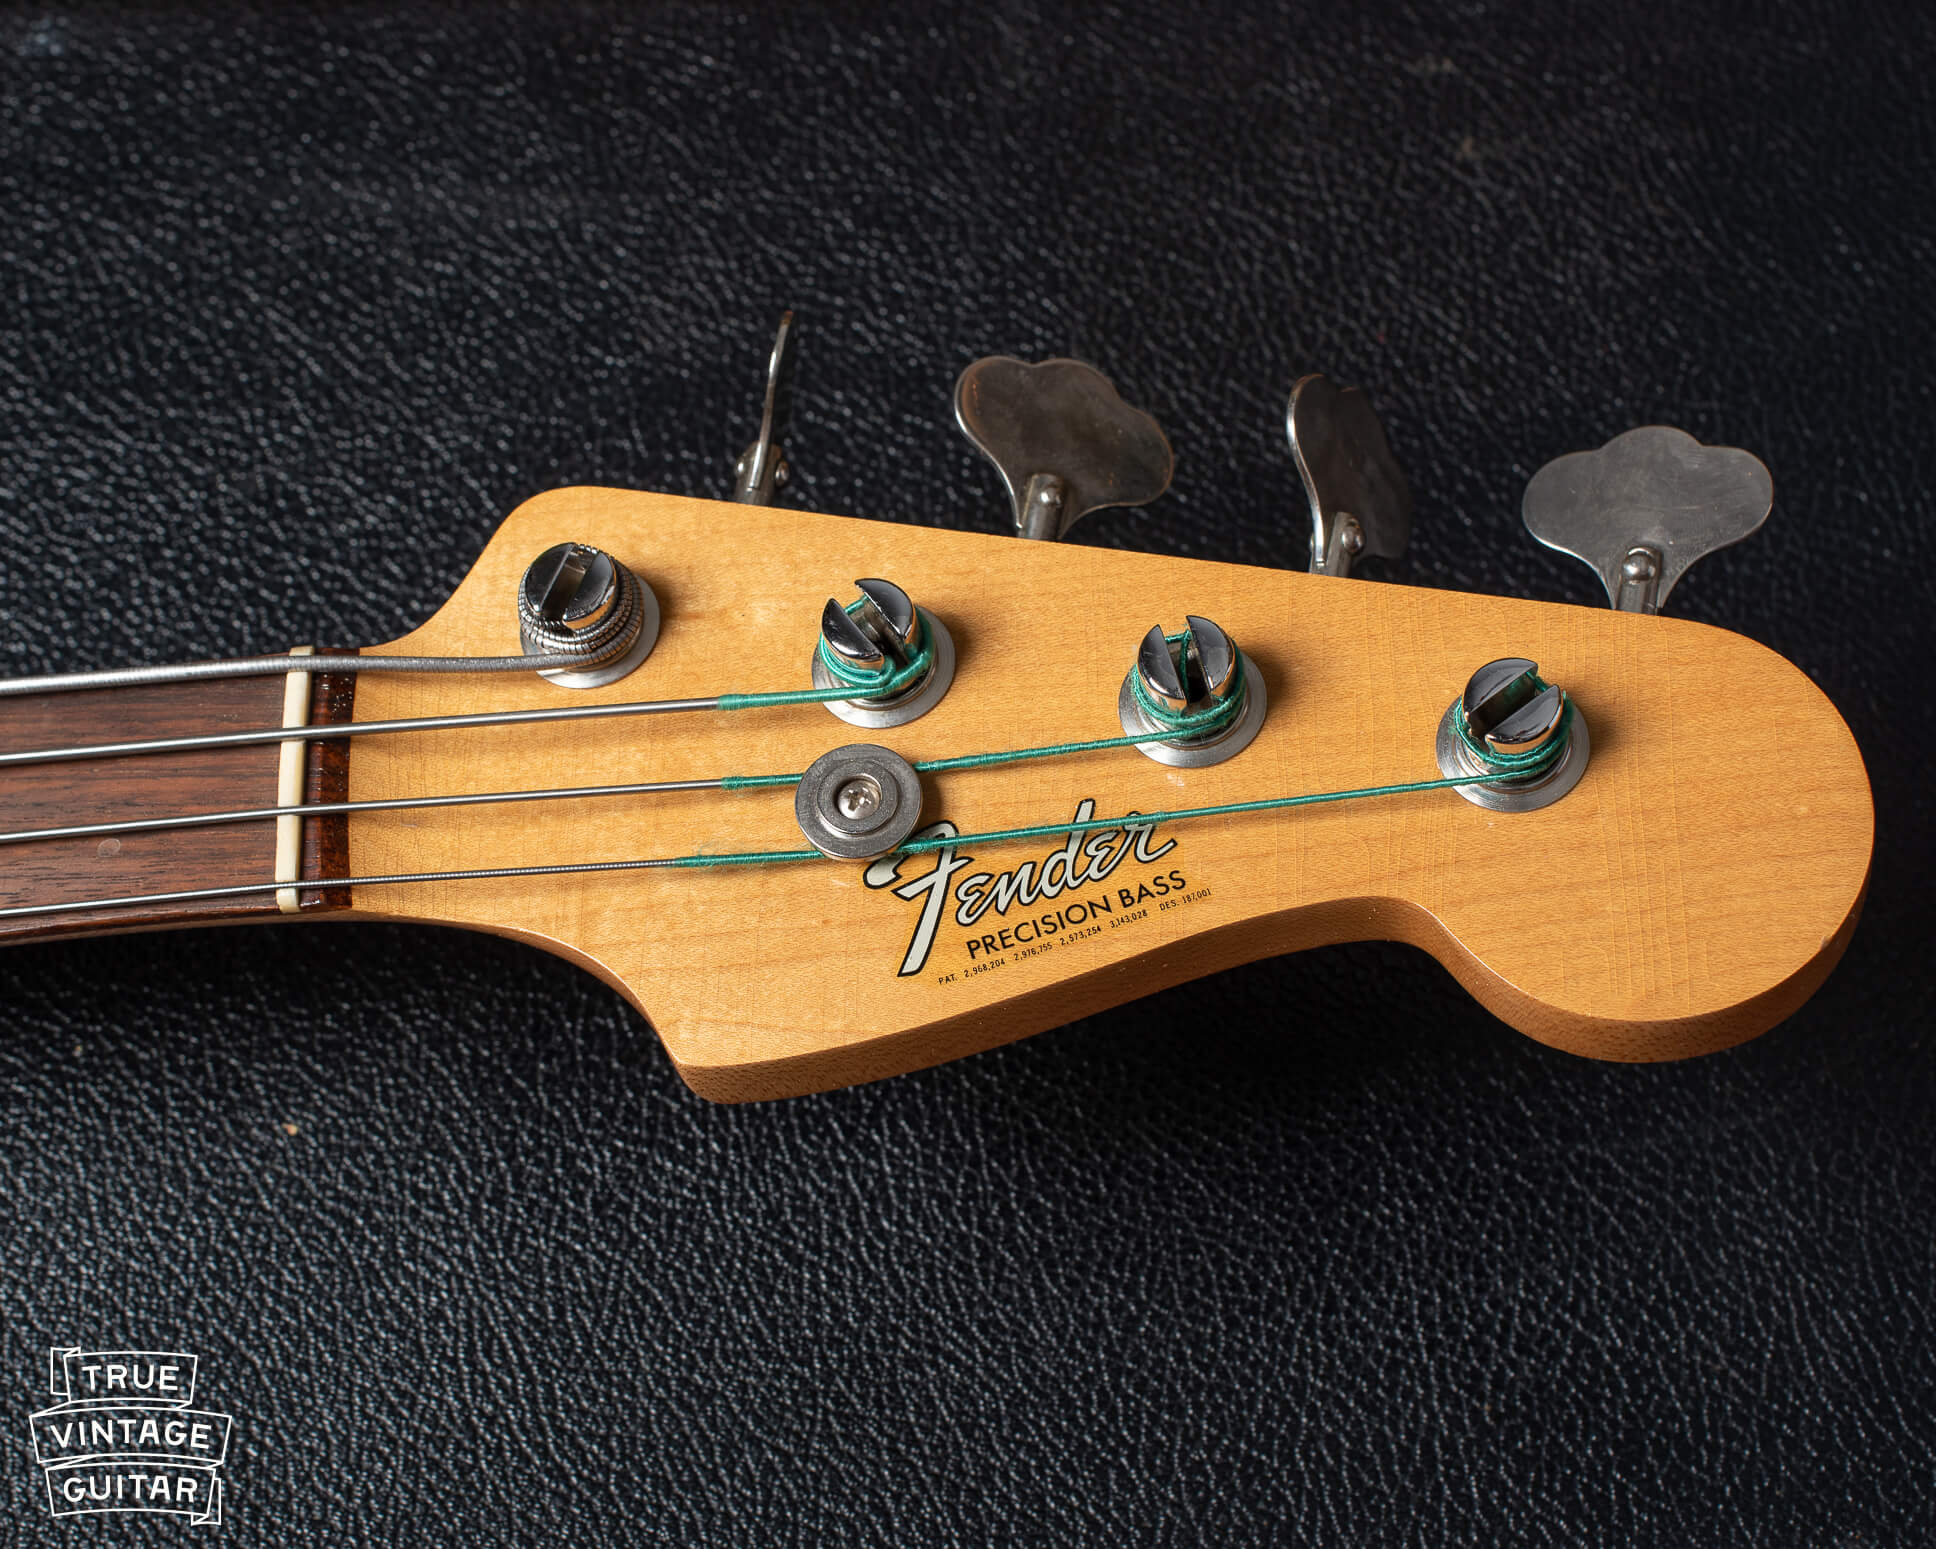 1966 Fender Precision Bass headstock and logo